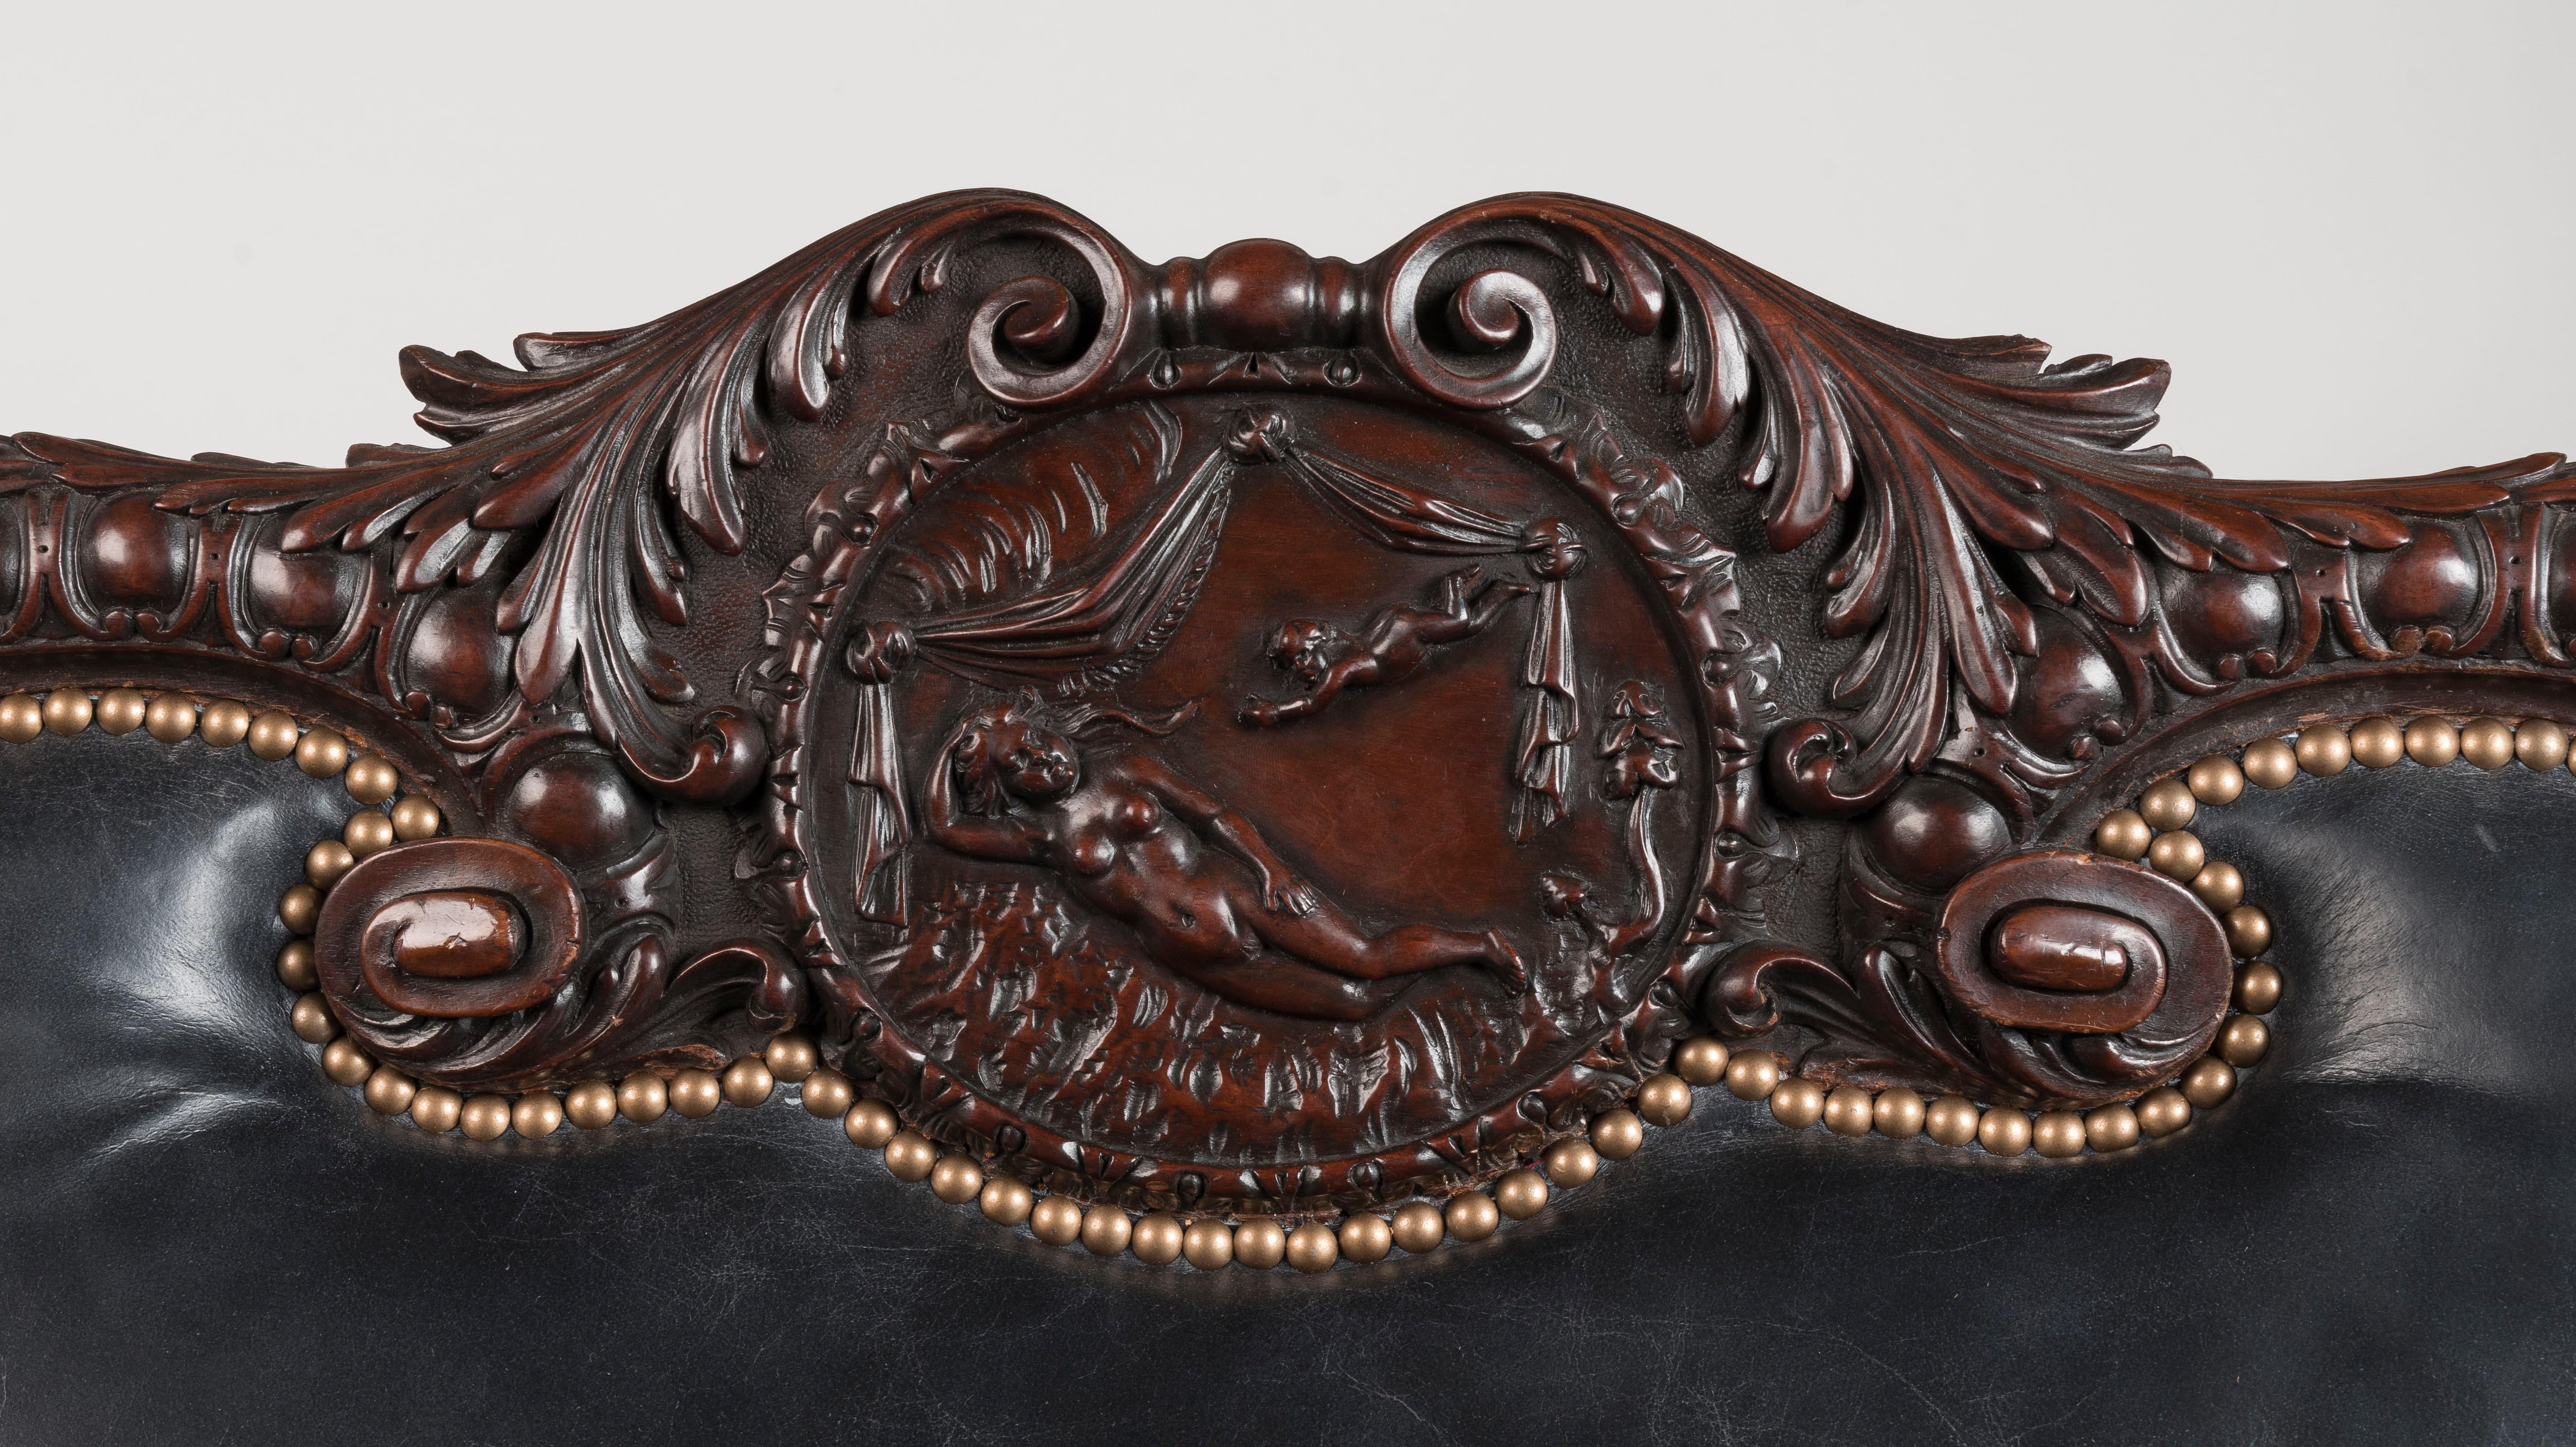 Large Late 19th Century Hand-Carved Mahogany Sofa with Leather and Velvet Fabric For Sale 3